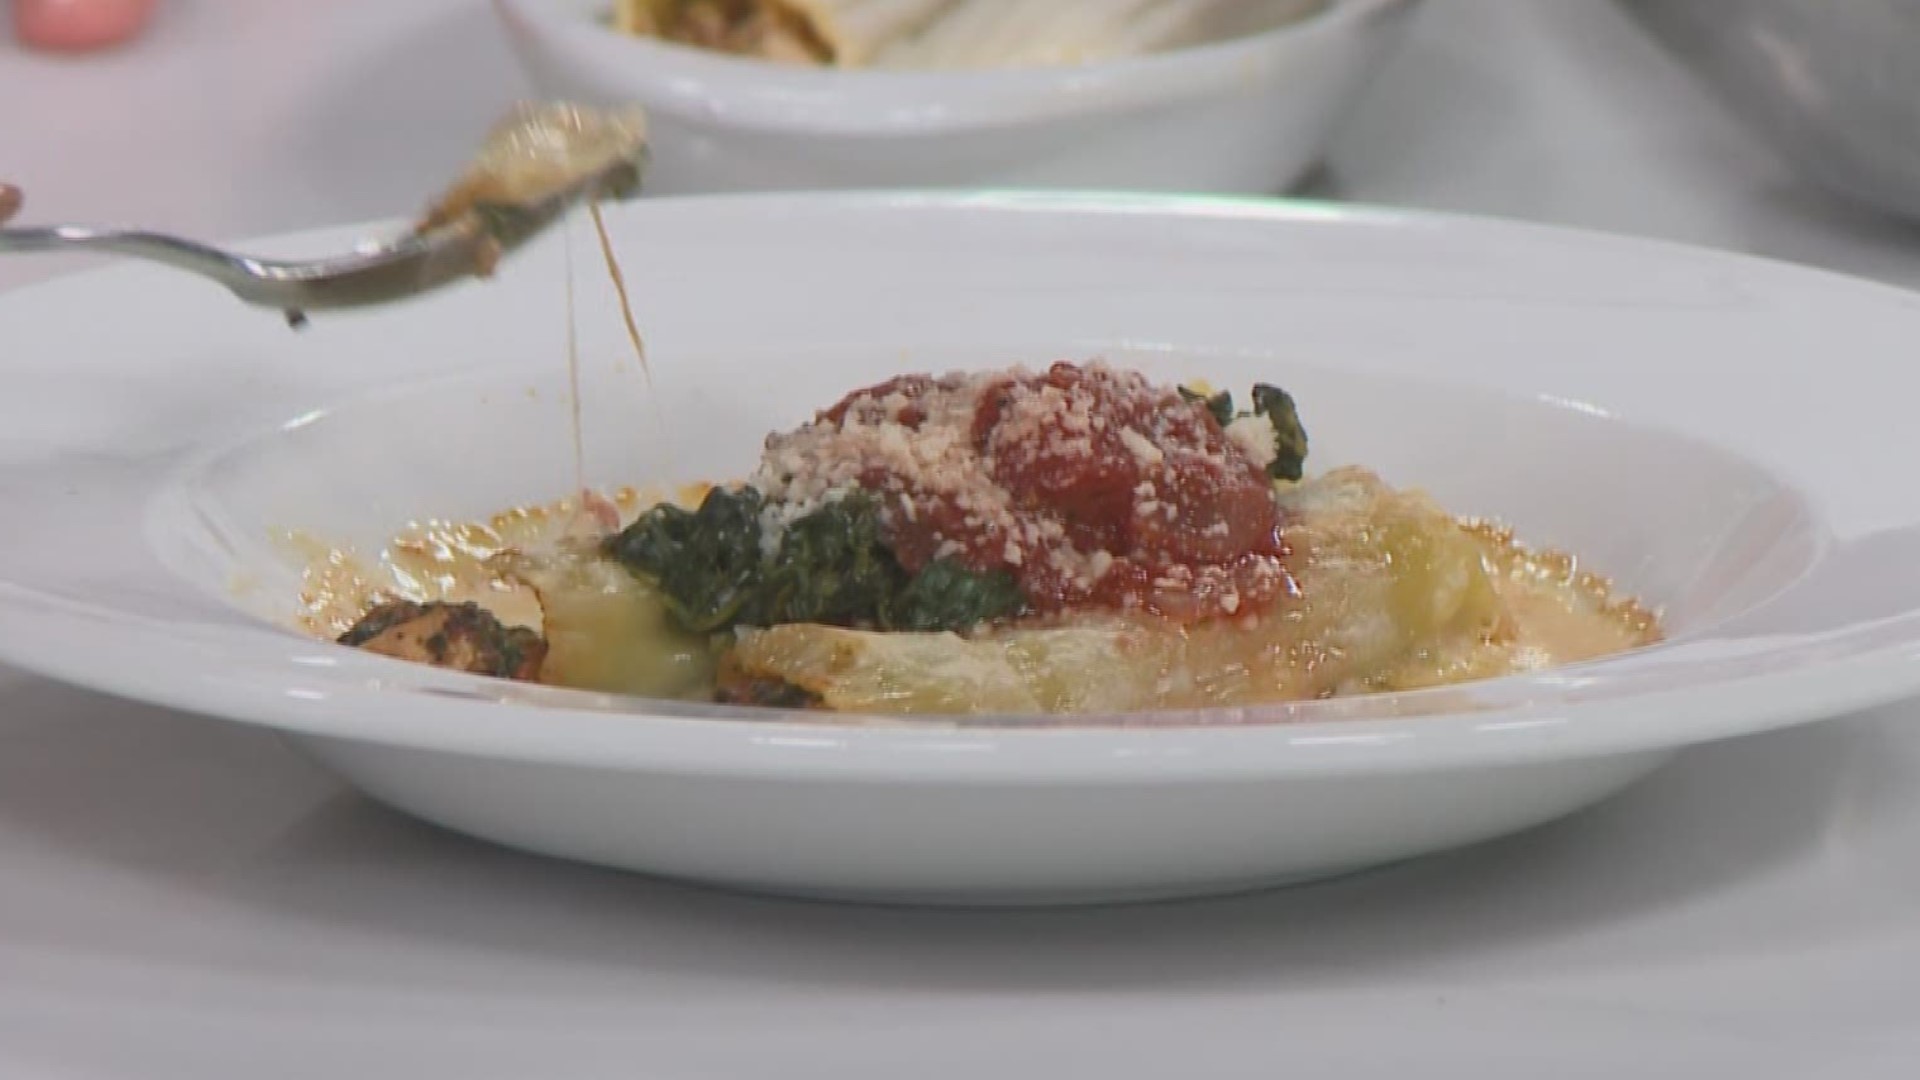 Chef Steven Topple with Ragazza di Bufalo Italian Restaurant drove down from Donnelly to join Tami Tremblay in the KTVB Kitchen to show how to cook this perfect dish for any time of the year.